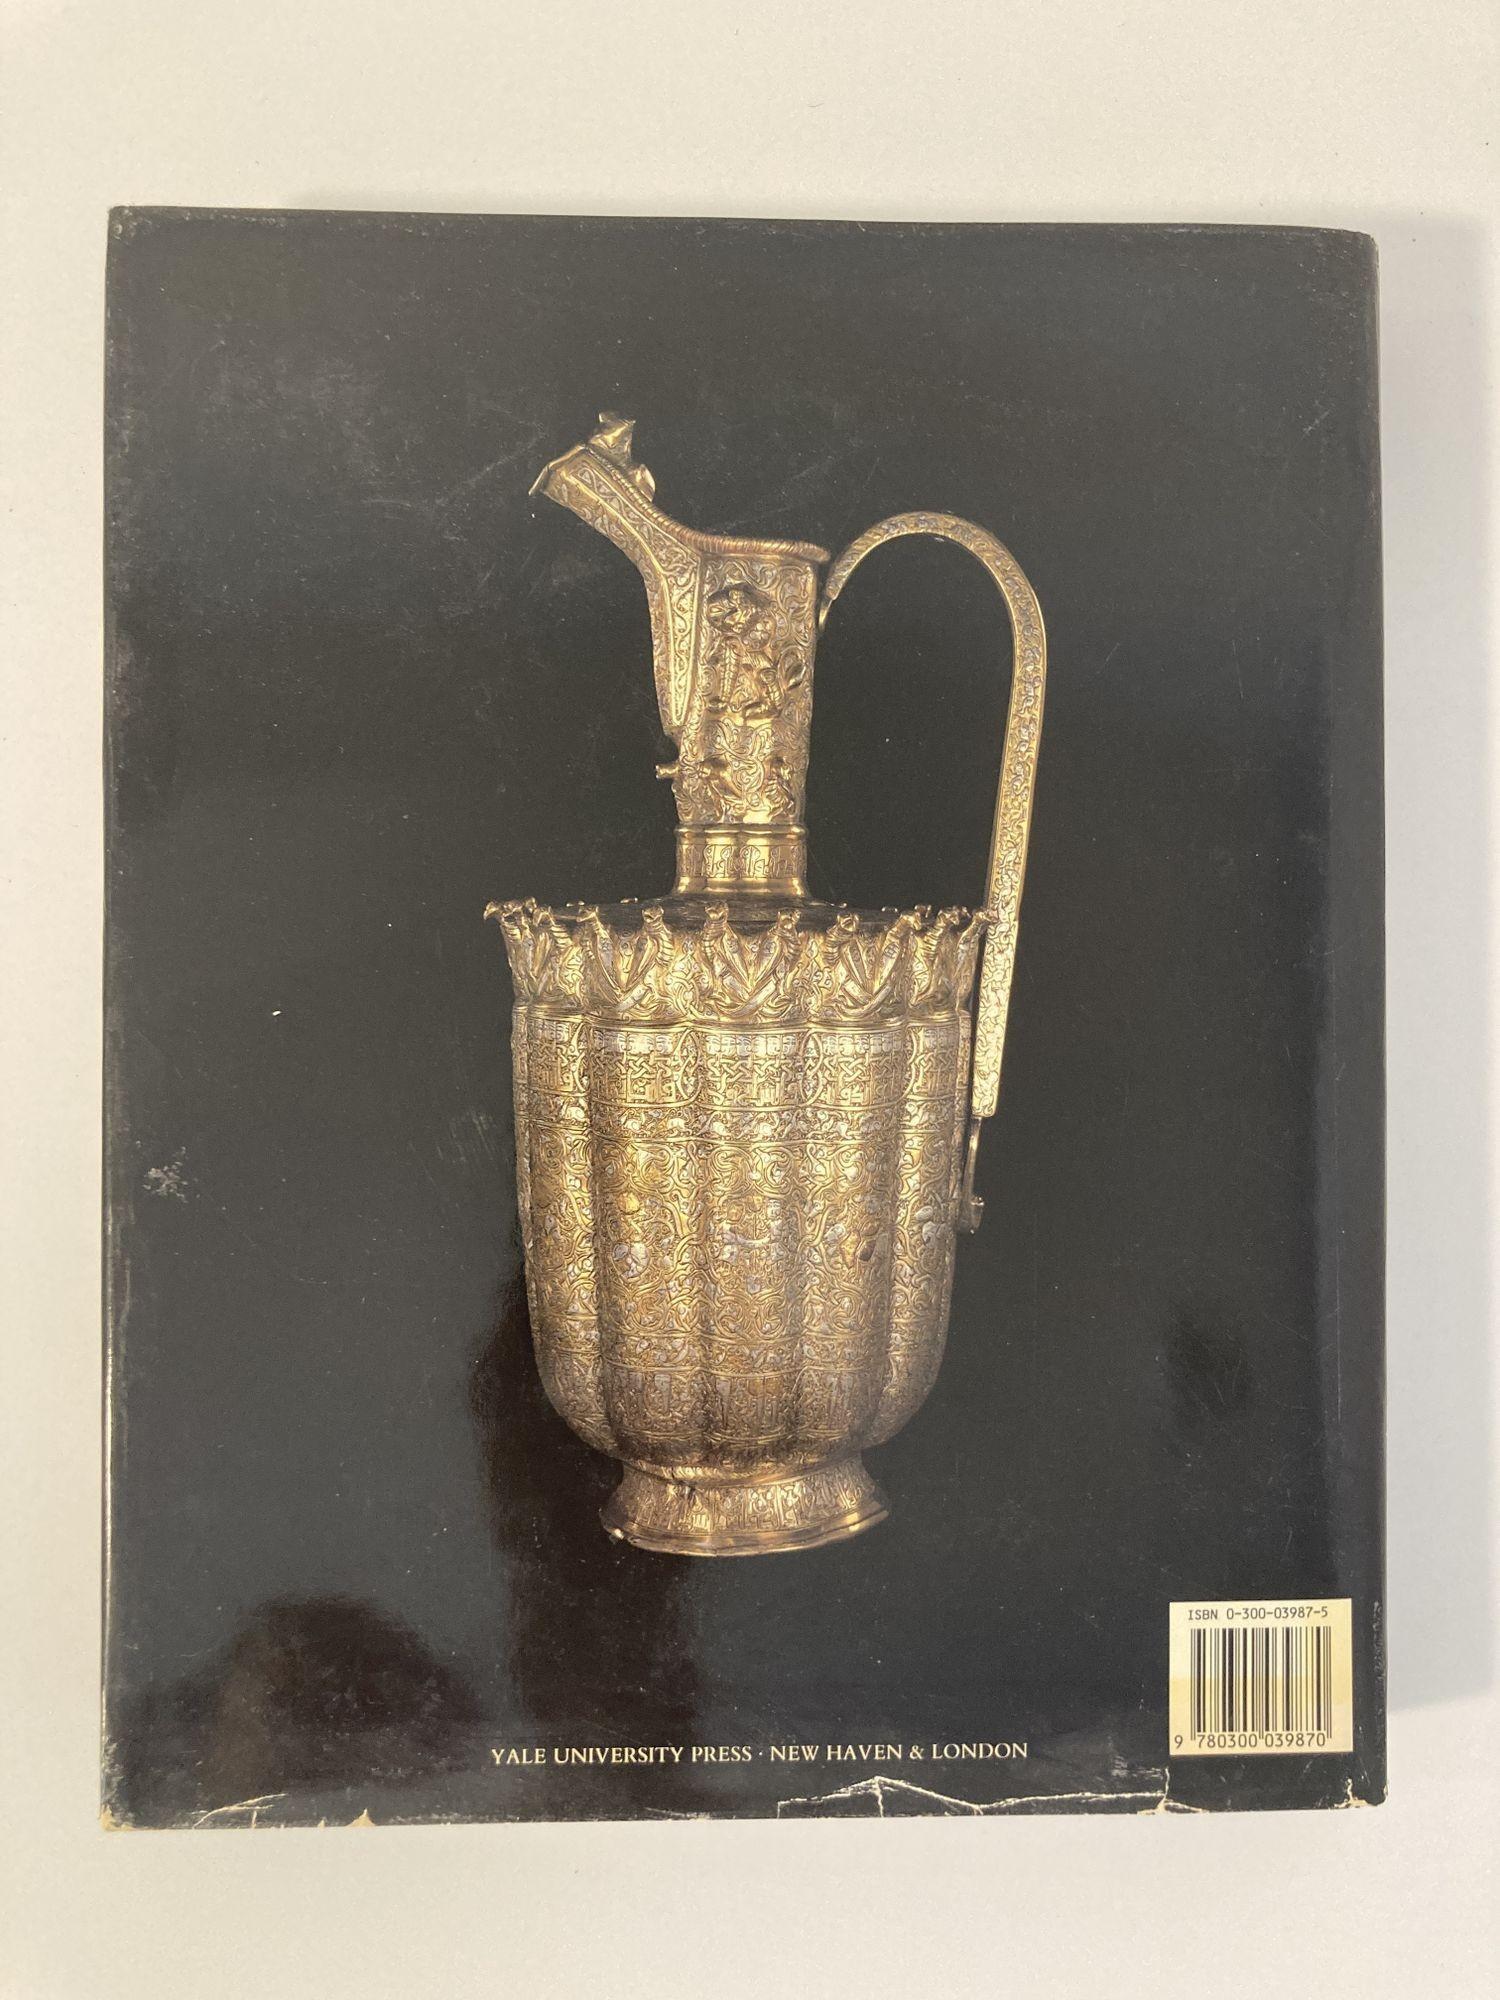 American The Arts of Persia Ronald W. Ferrier Hardcover Book 1st Ed. 1989 For Sale